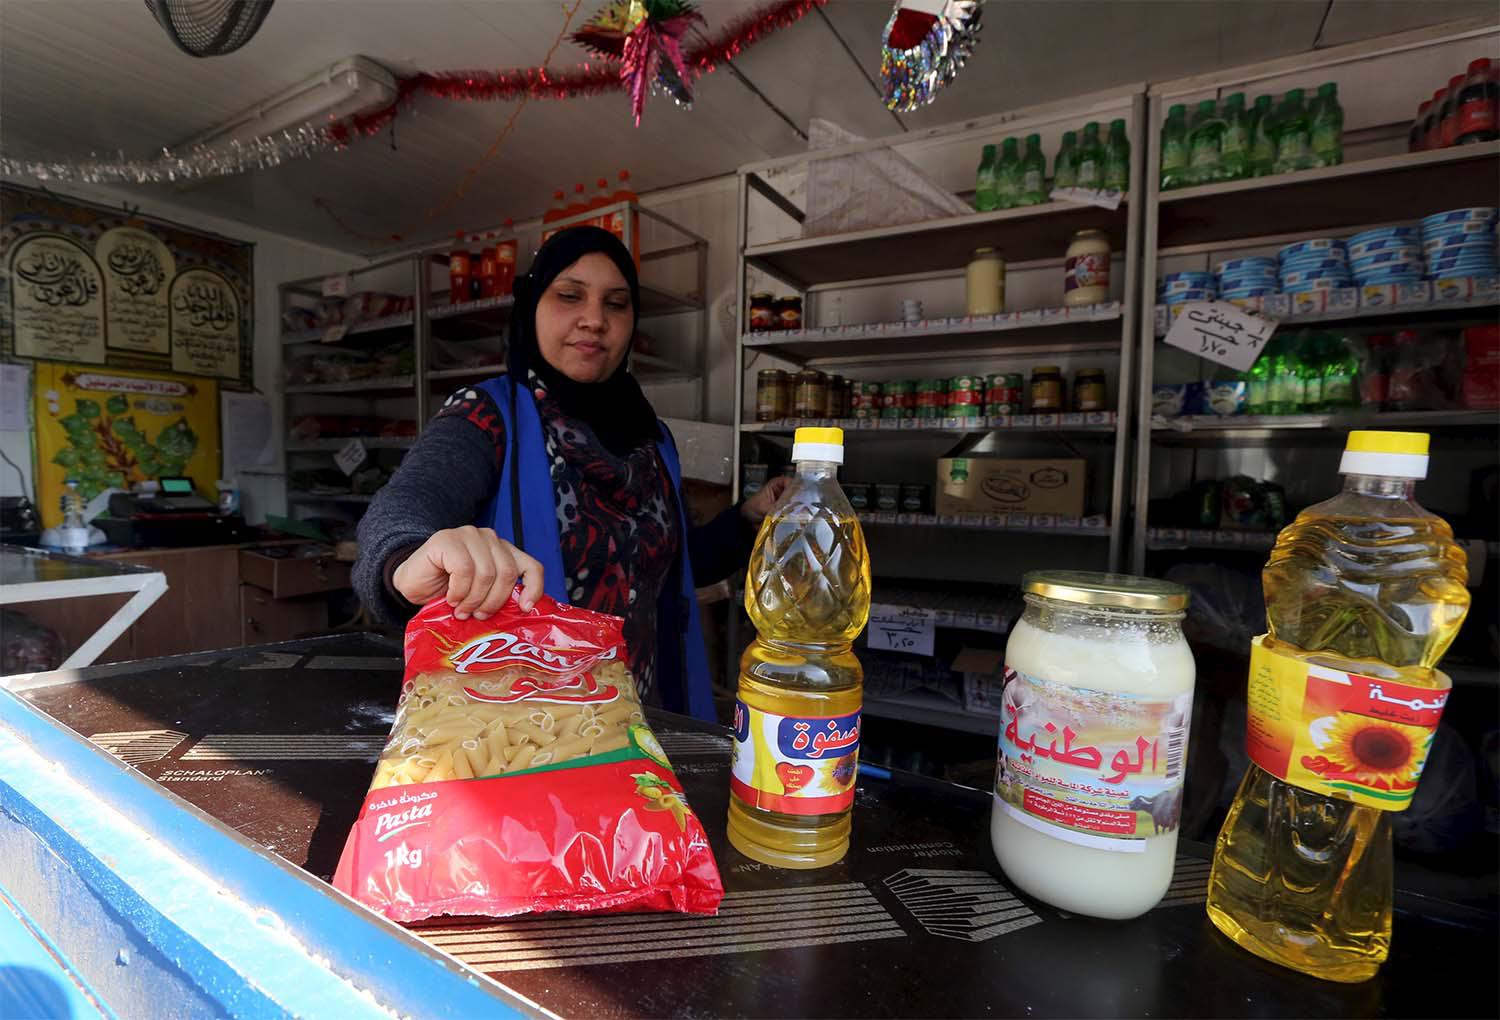 The programme provides subsidised goods to more than 60 million Egyptians